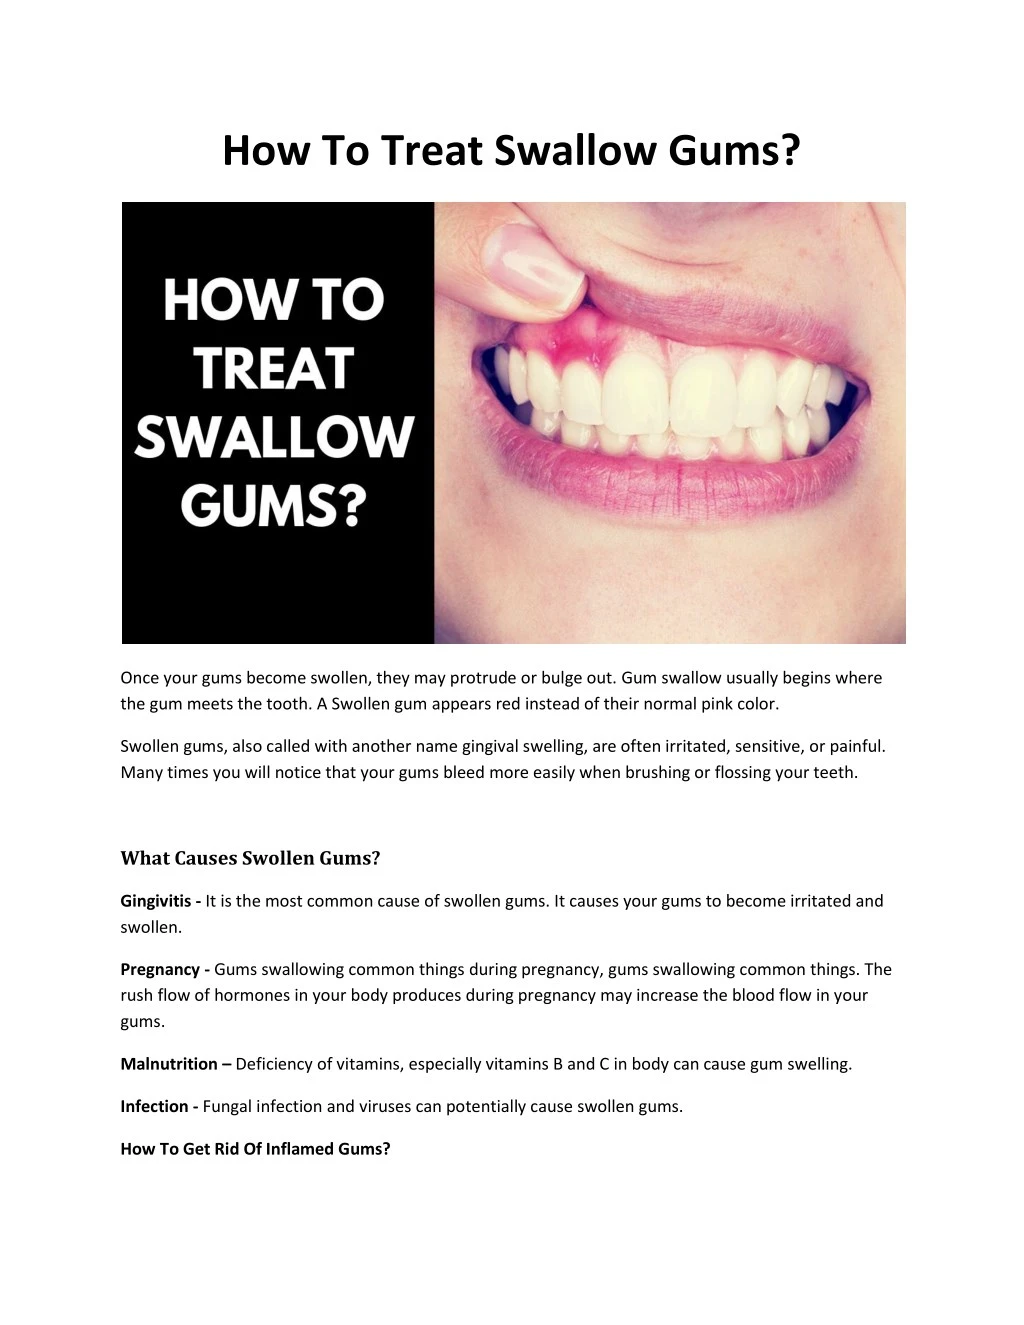 how to treat swallow gums